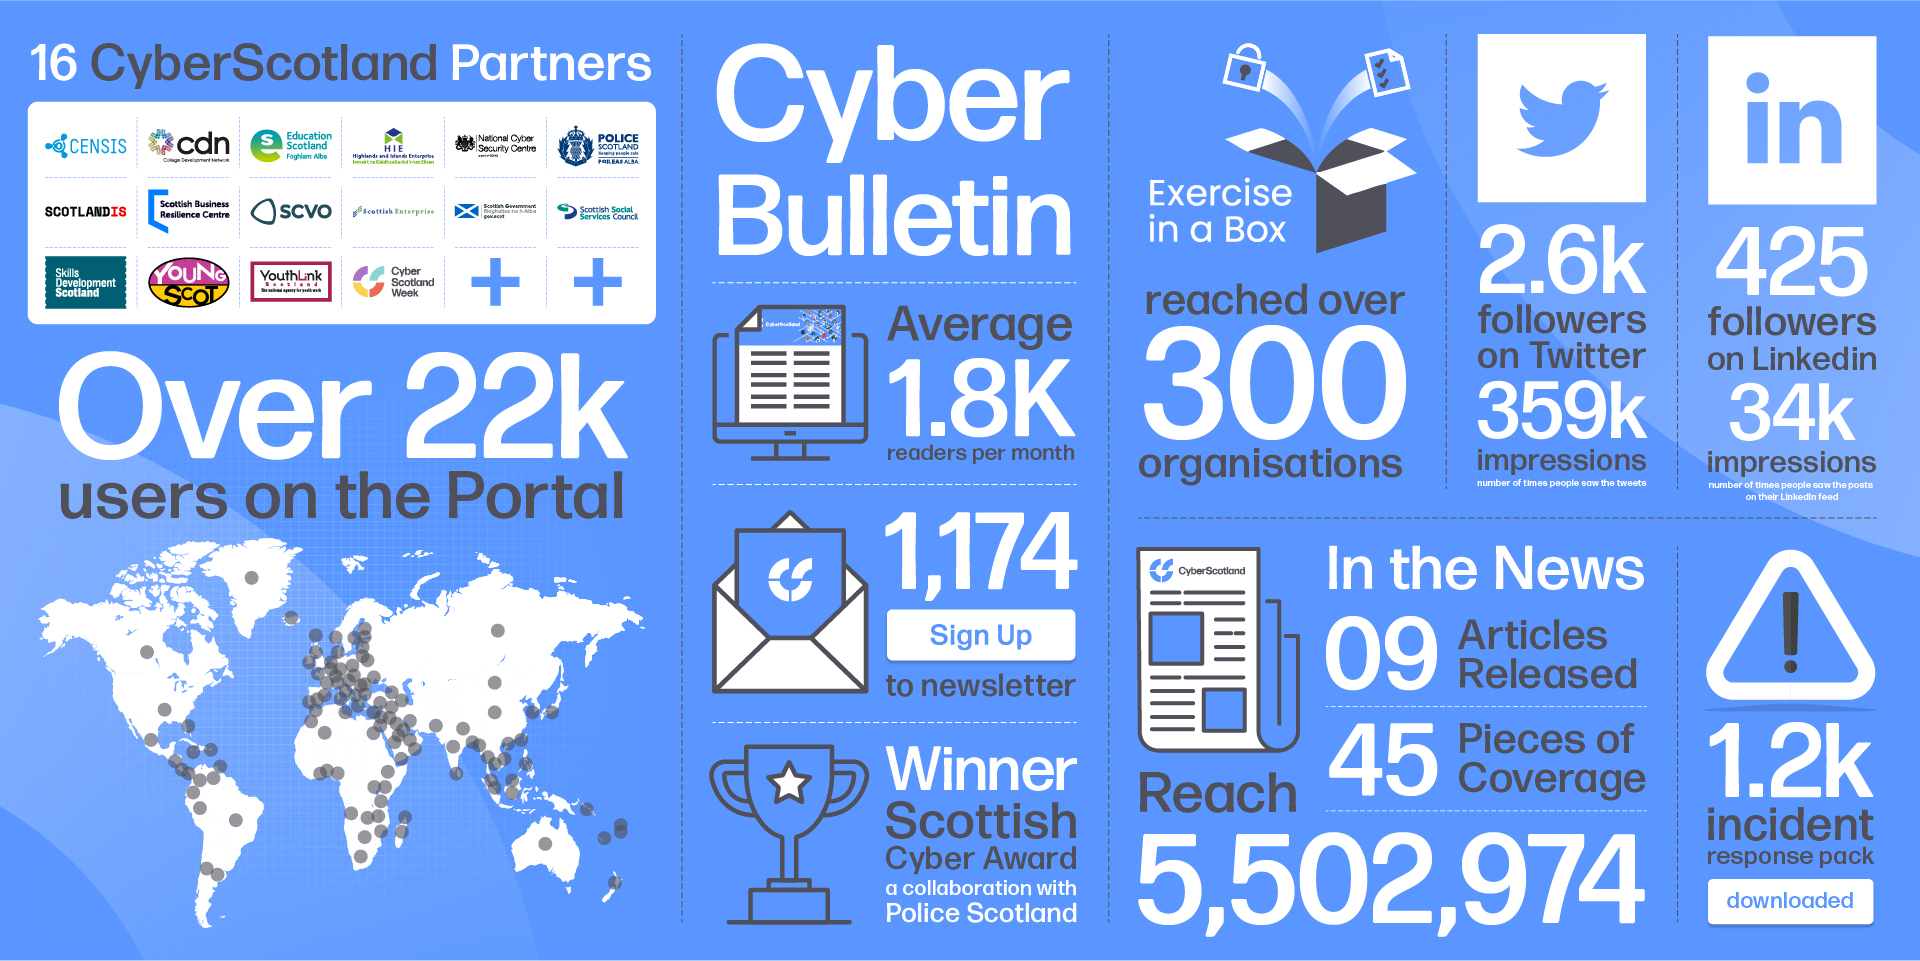 CyberScotland Partnership supports more than 1,200 businesses